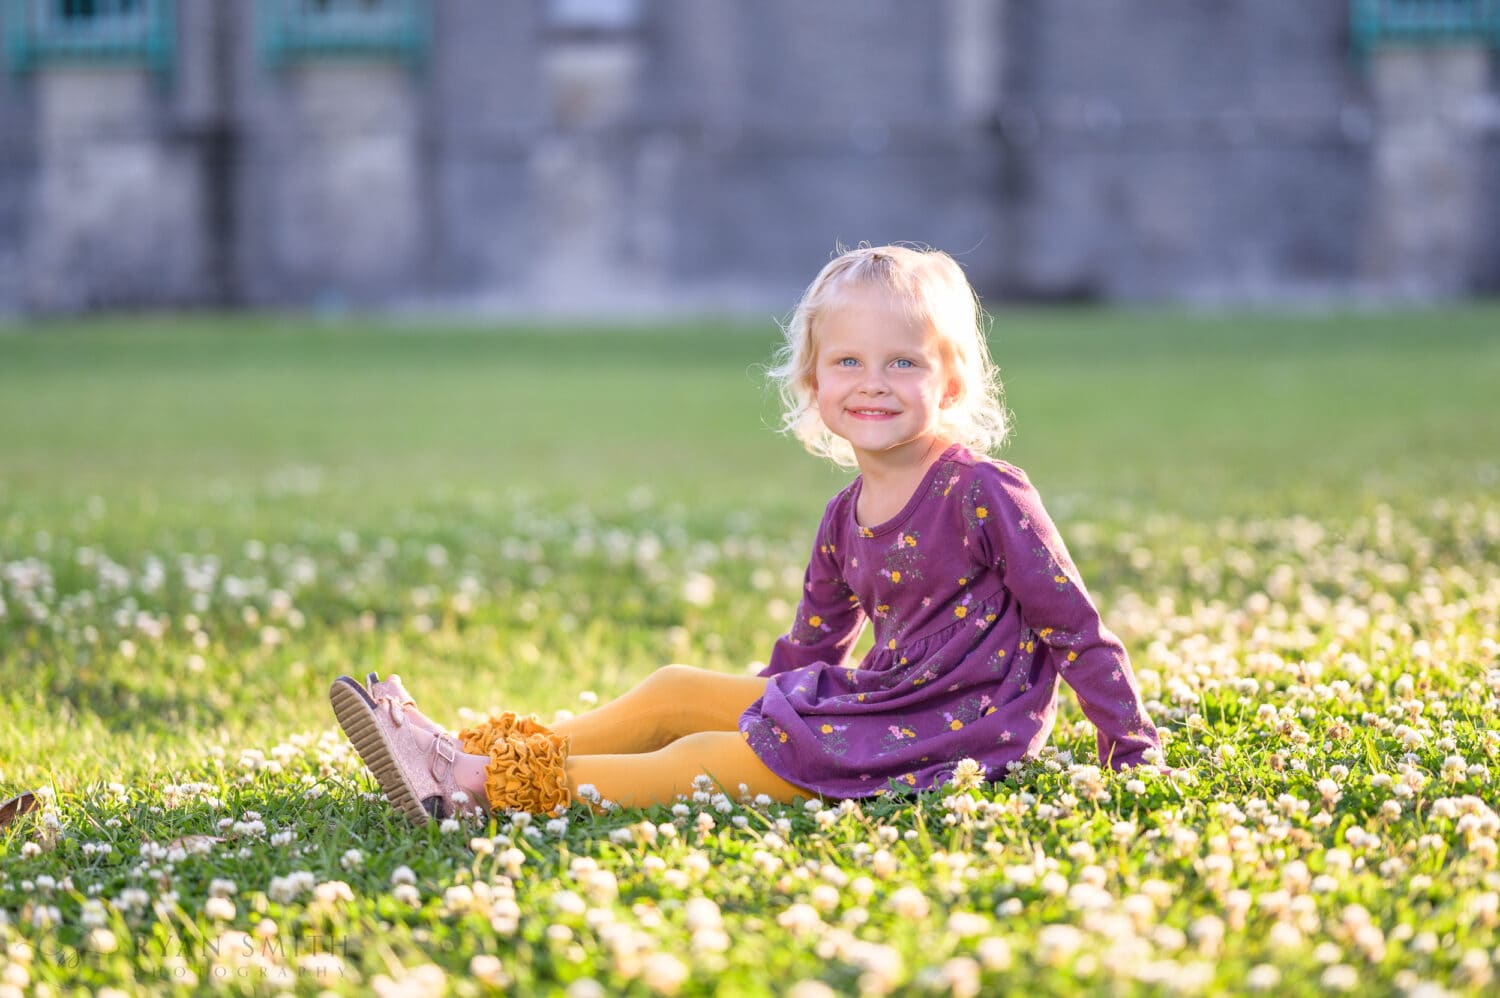 Cute baby girl sitting in the grass and flowers - Huntington Beach State Park